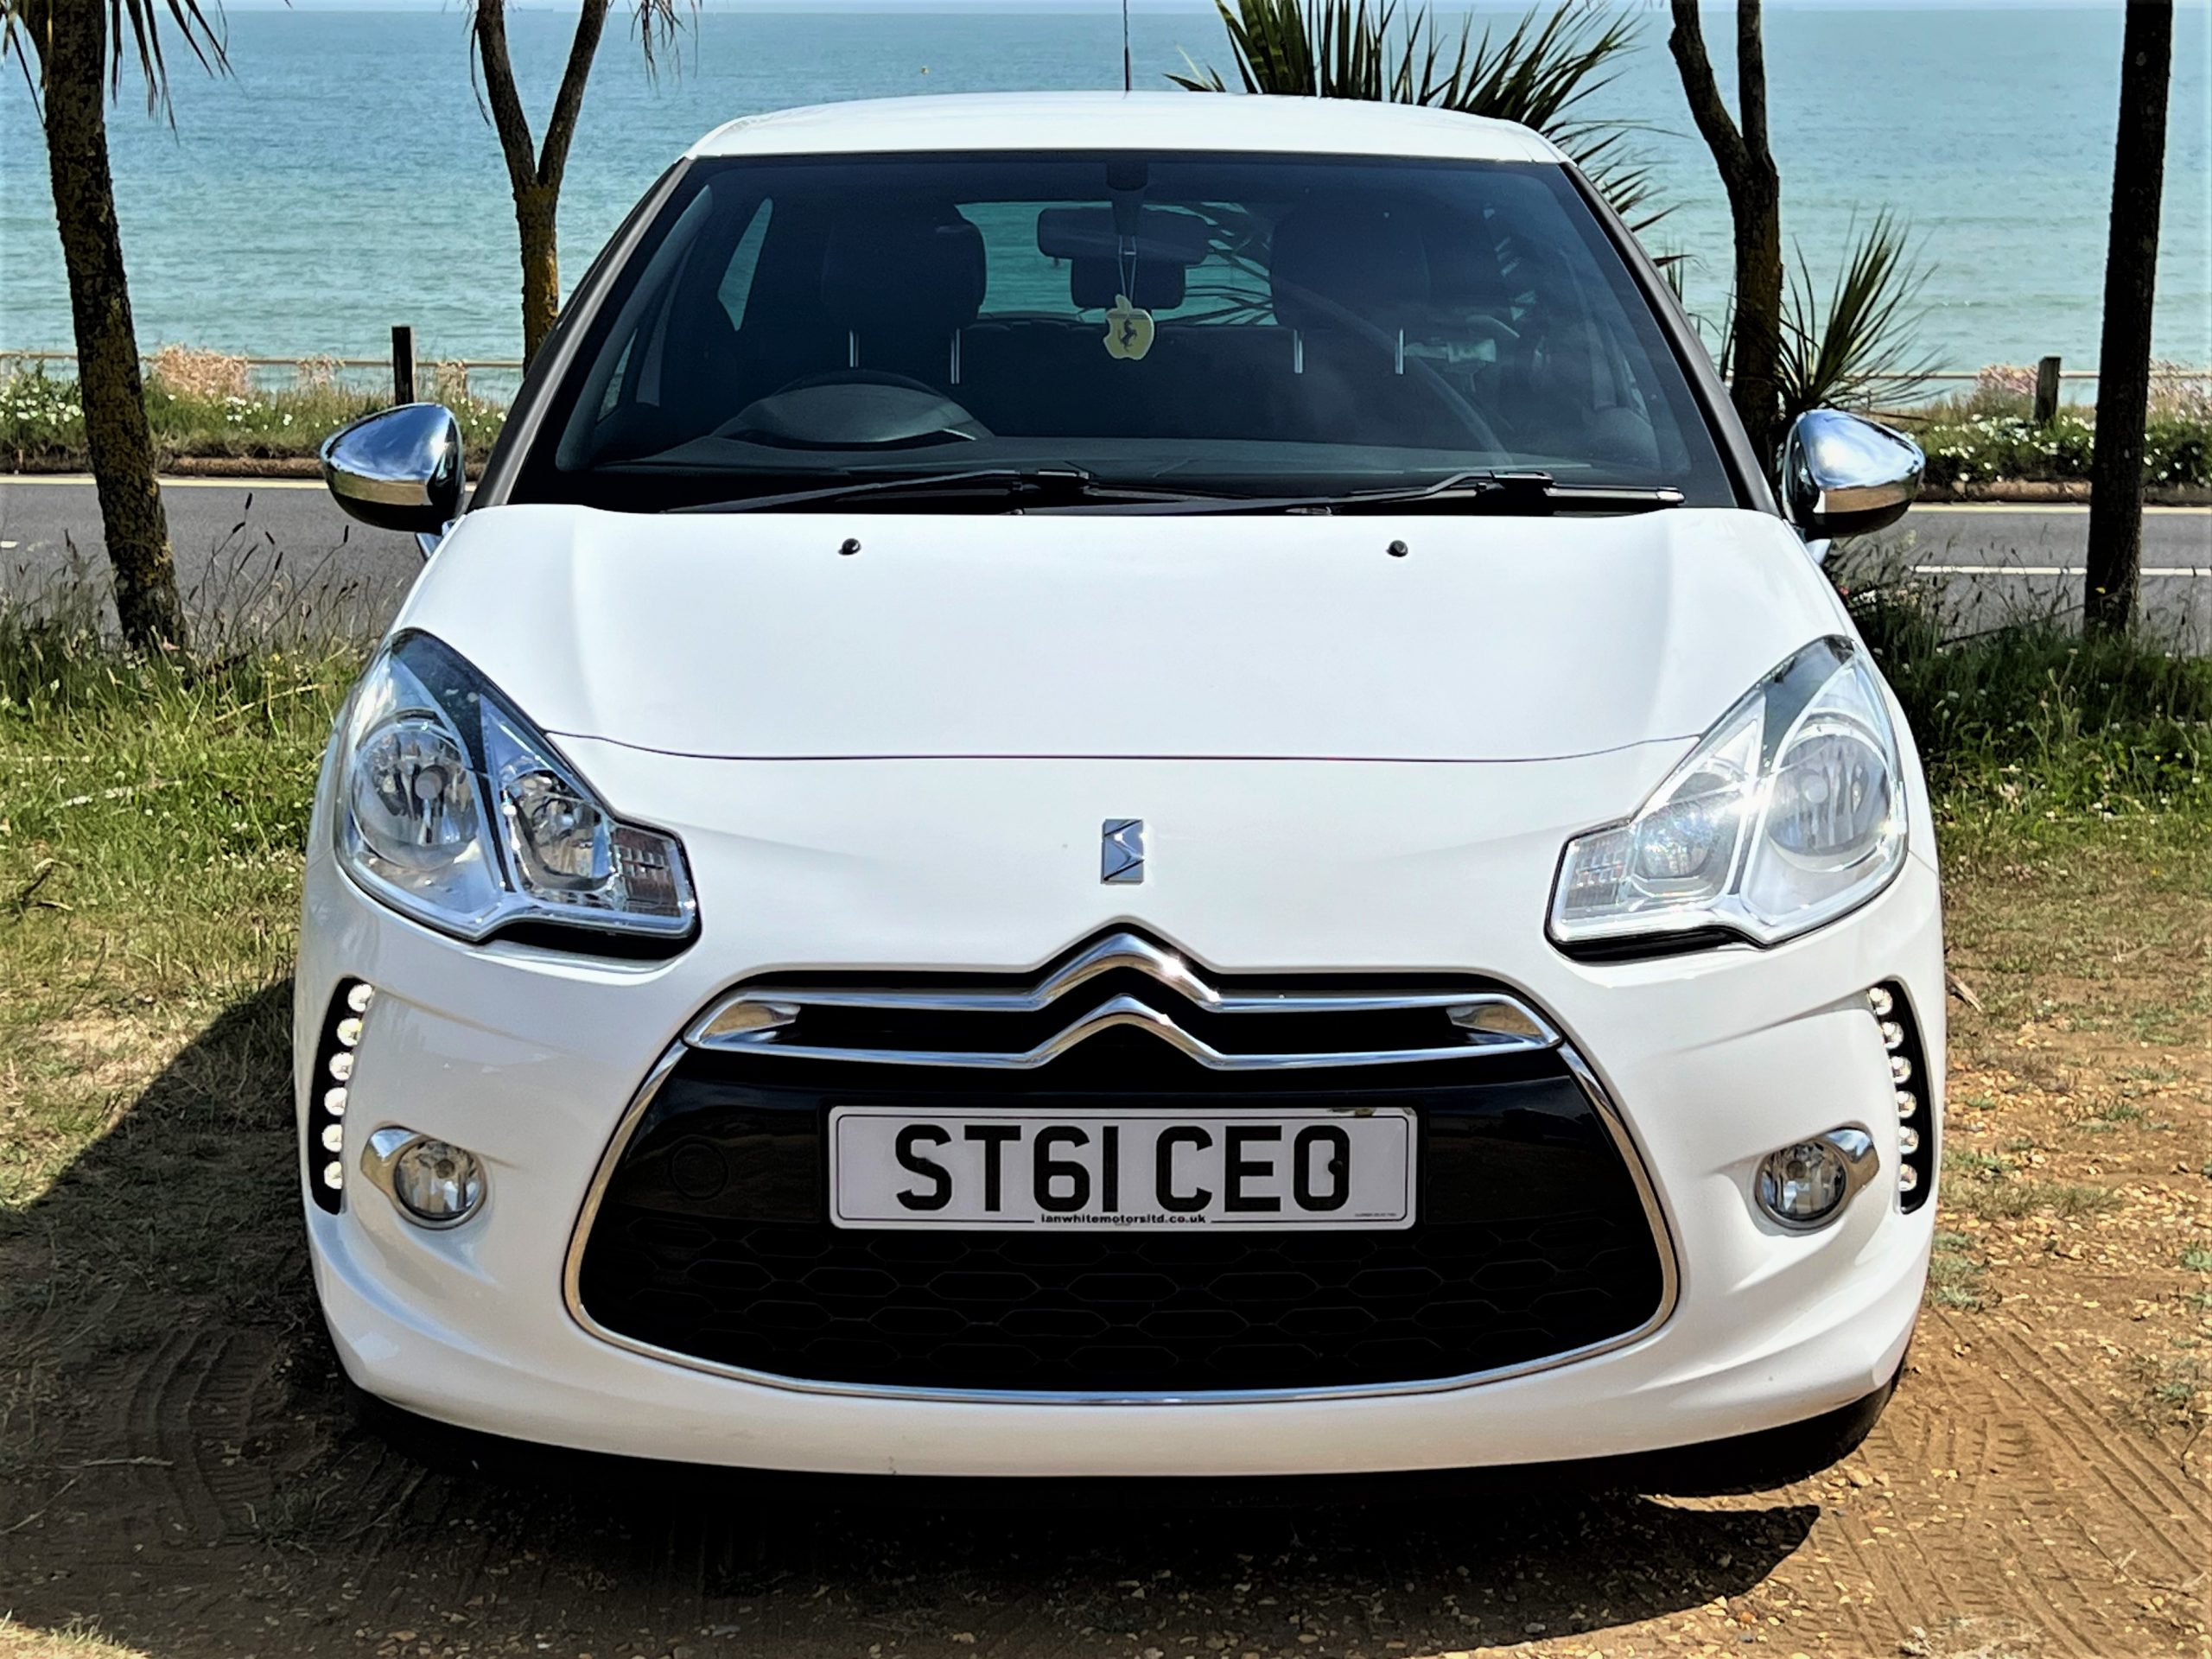 2011 (61) Citroen Ds3 1.6 e-HDi Airdream DStyle 3dr